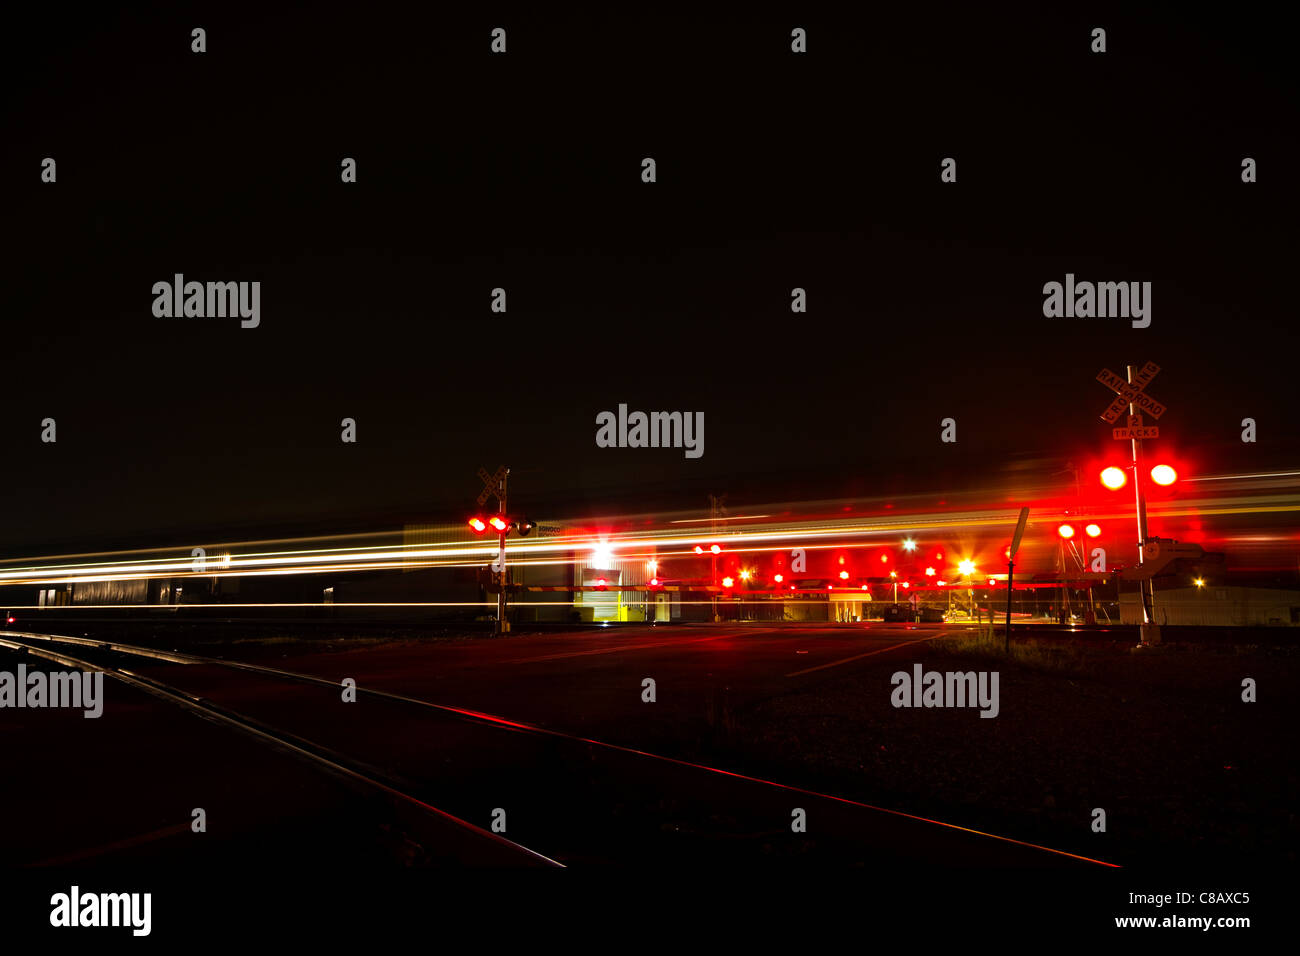 Railroad crossing warning devices long exposure Stock Photo